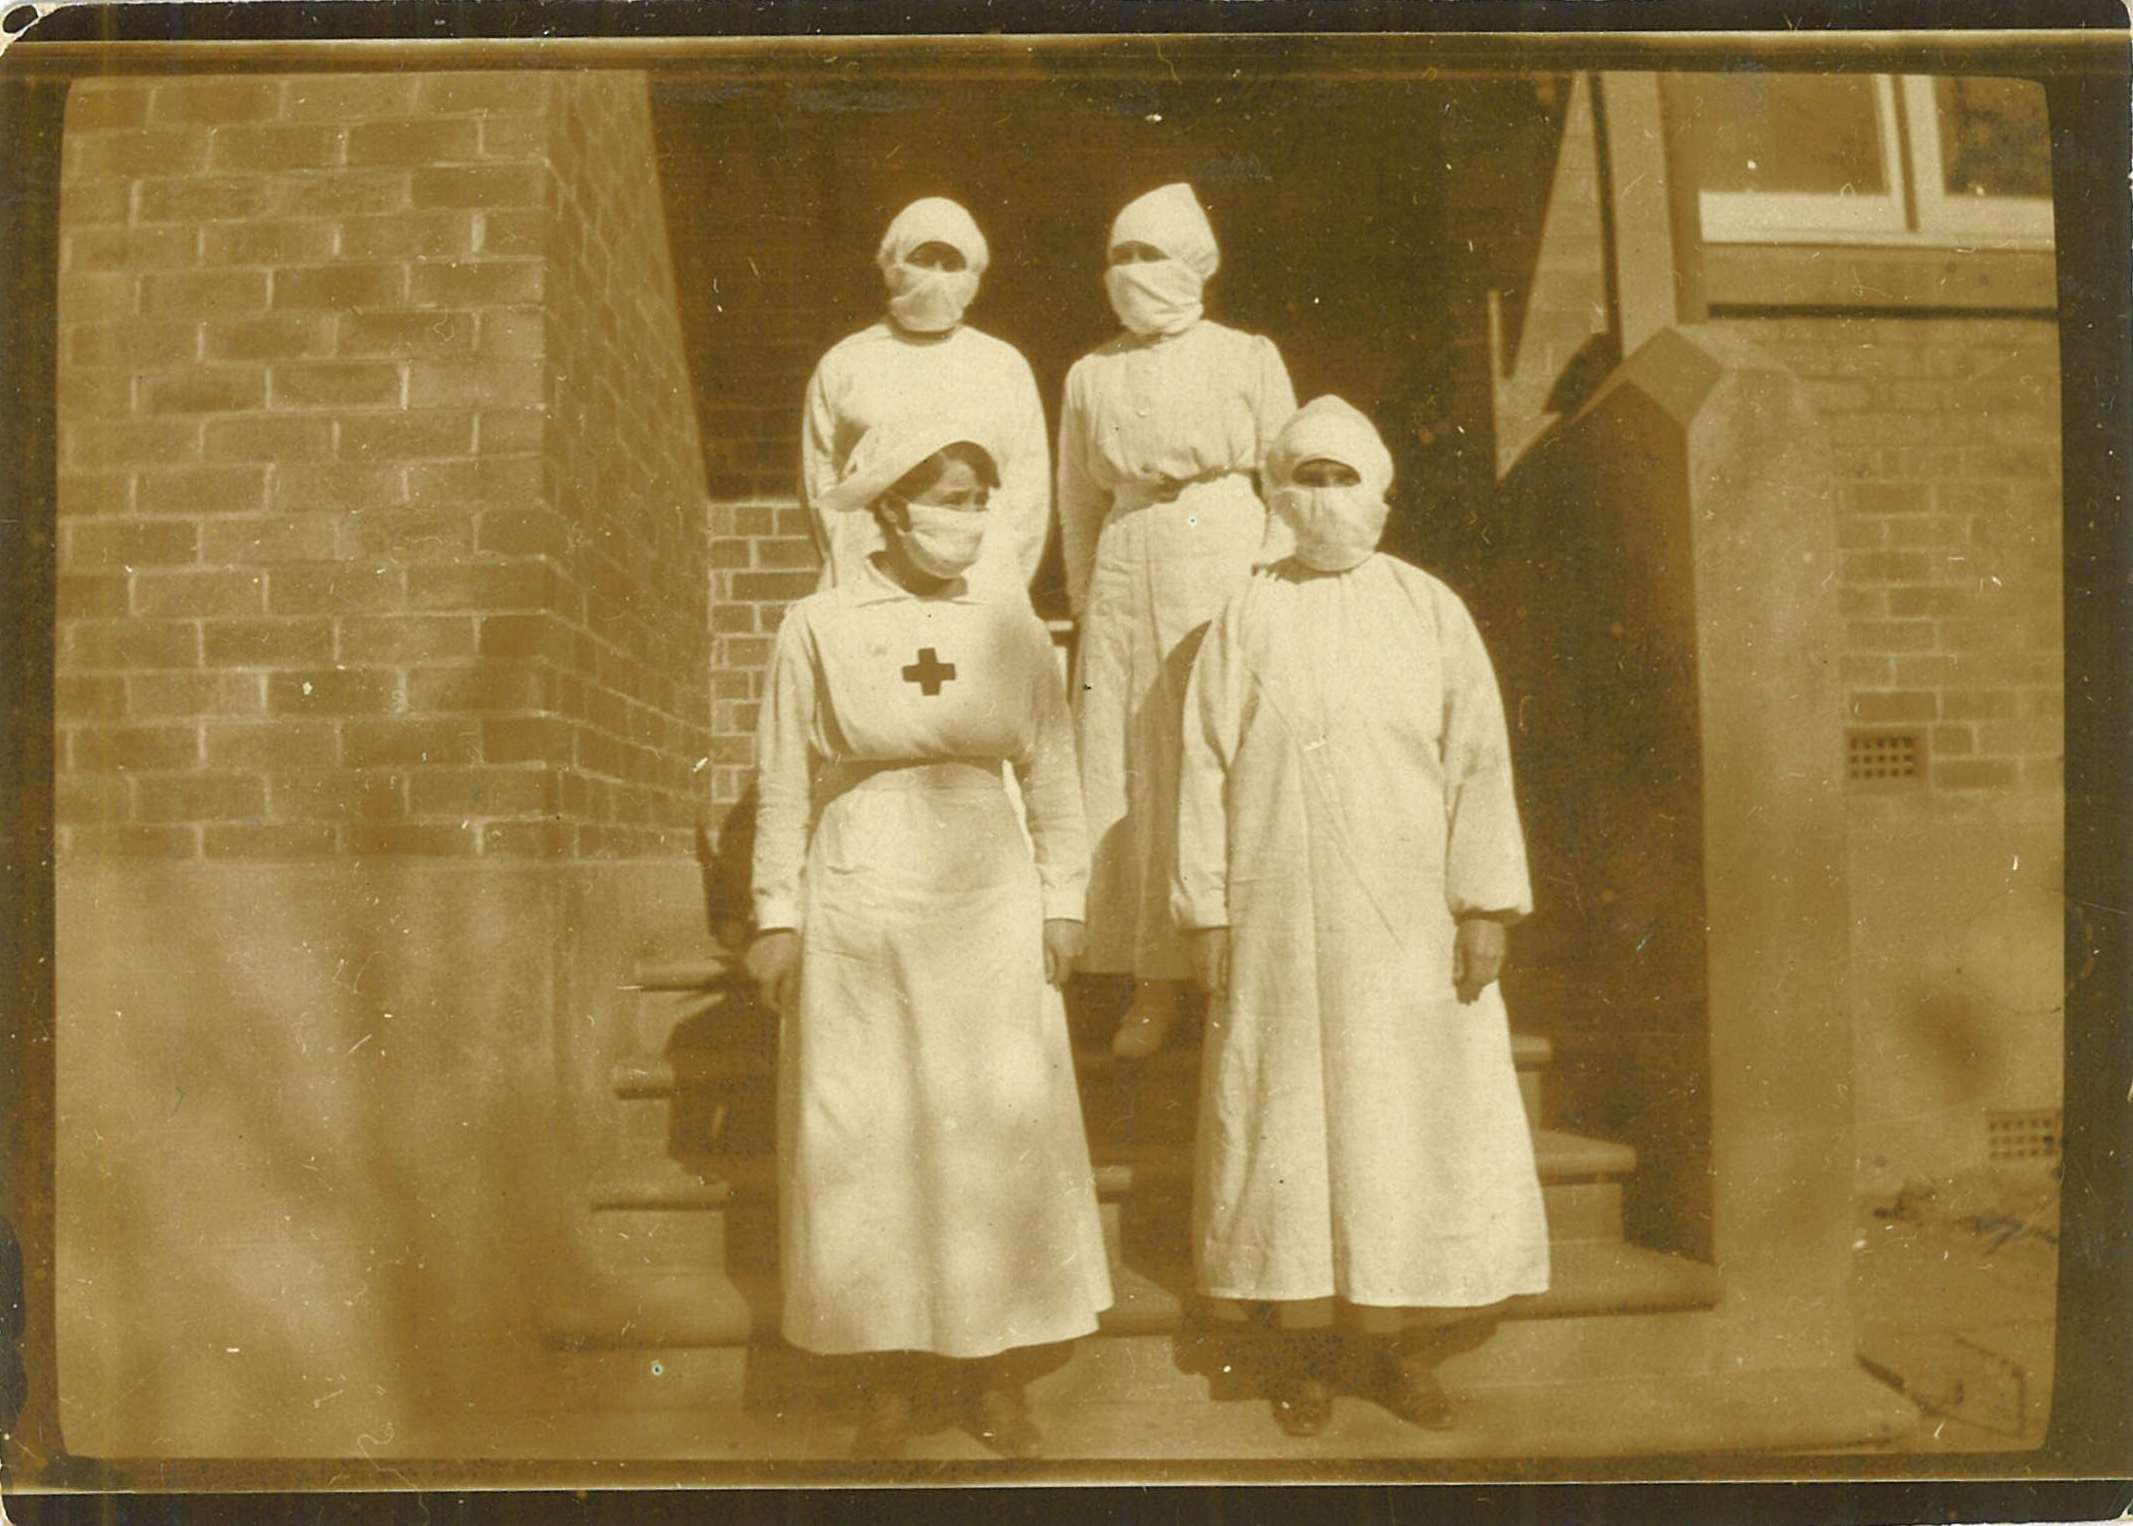 Helen Macgregor and fellow nurses outside the Nowra Public School converted into a temporary hospital for pnemonic influenza epidemic, 1919 / photographer unknown